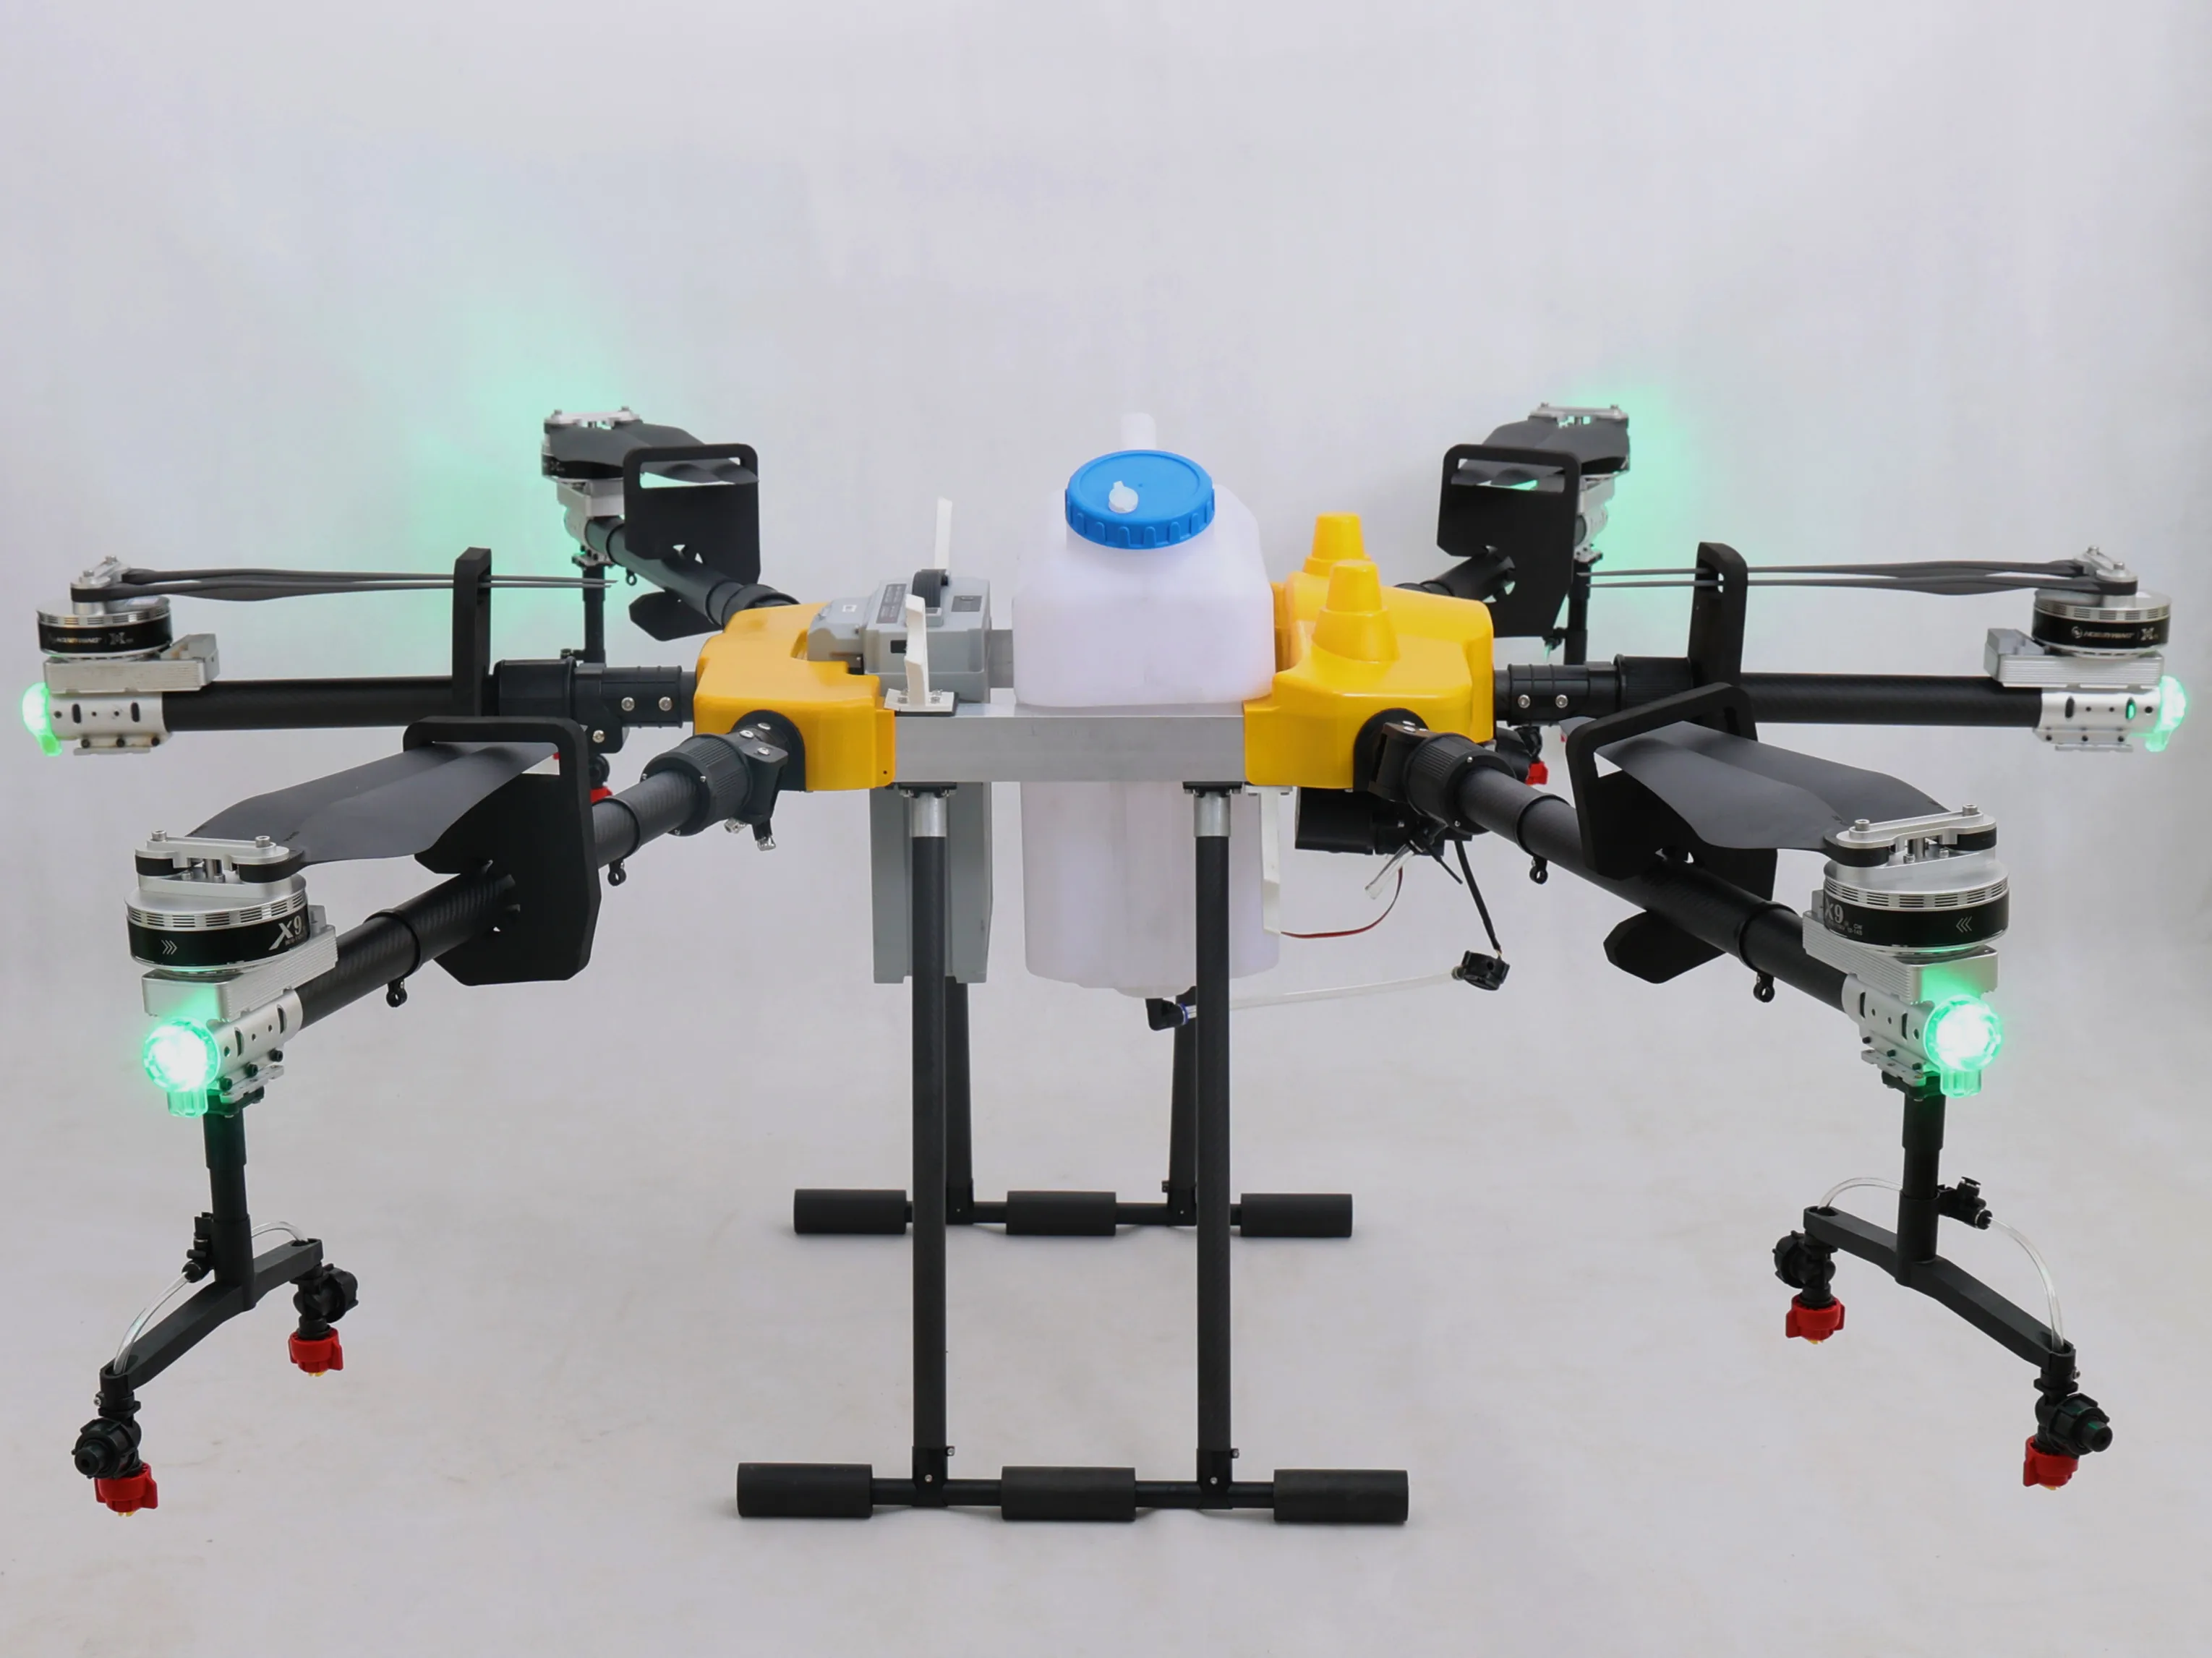 6-axis 20L plug-in Heavy lift drone sprayer agricultural drone 20kg payload drone